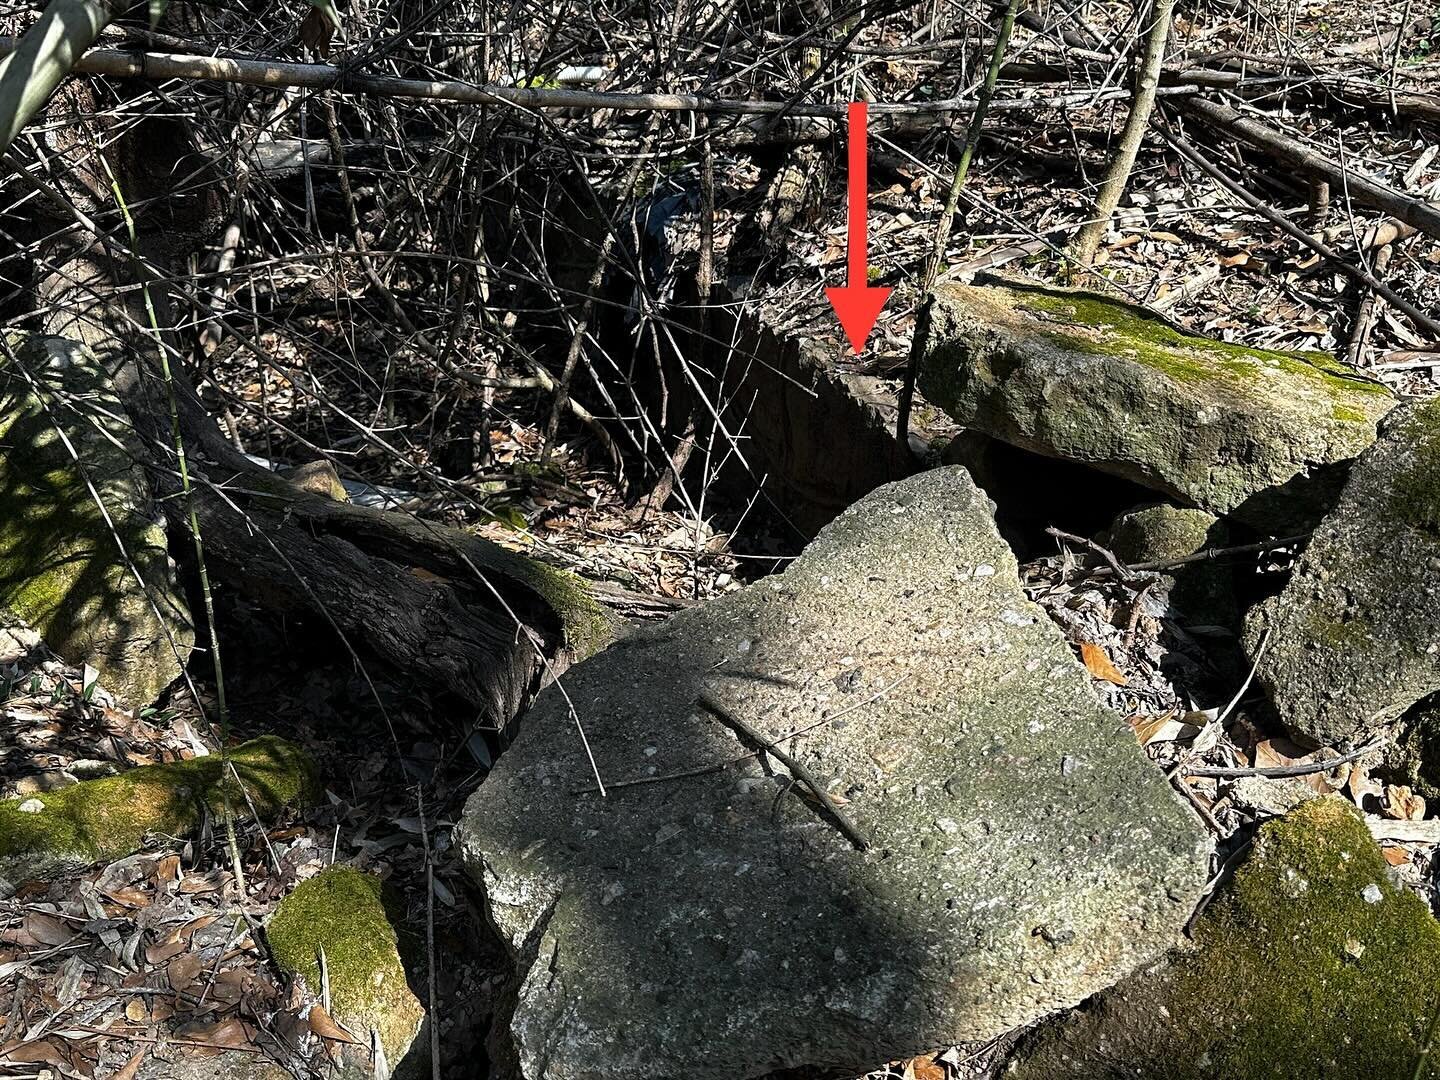 We found it! During the perfect window of kudzu regression we found the concrete foundations of Briarcliff Zoo.

Usually this area is so overgrown that it&rsquo;s completely impenetrable. A couple weeks ago I had a reason to be on the property and as